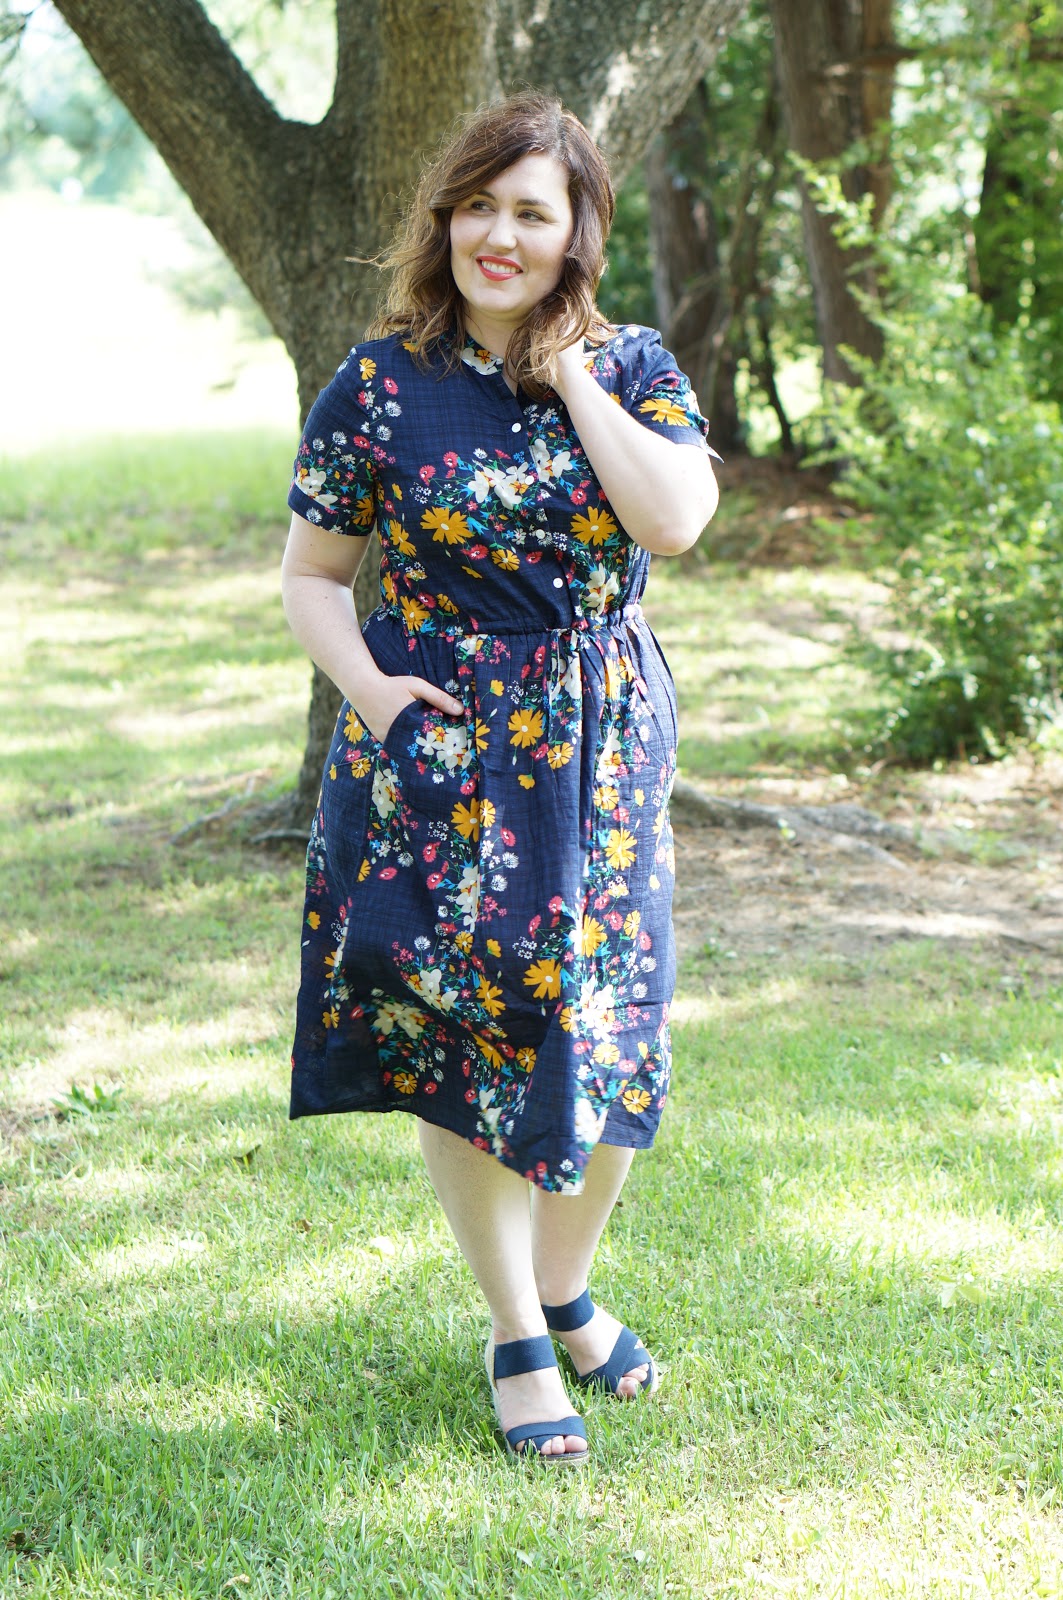 Rebecca Lately Zaful Floral Vintage Dress Target Navy Wedges Marc Jacobs Beauty Cora Cora